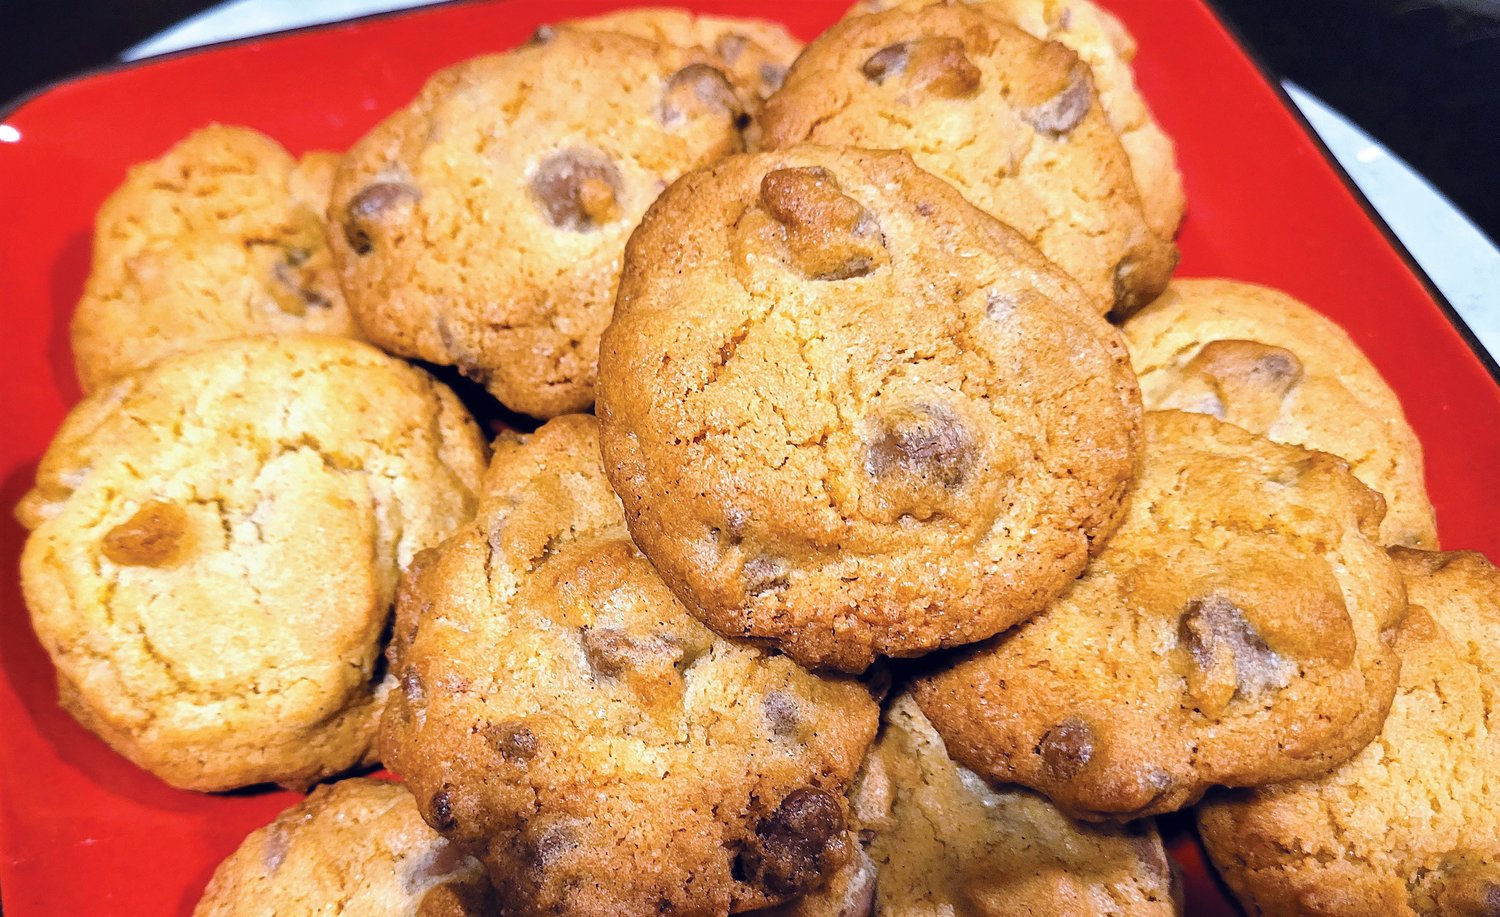 These 'vanilla explosion cookies' are great — with or without chocolate chips.